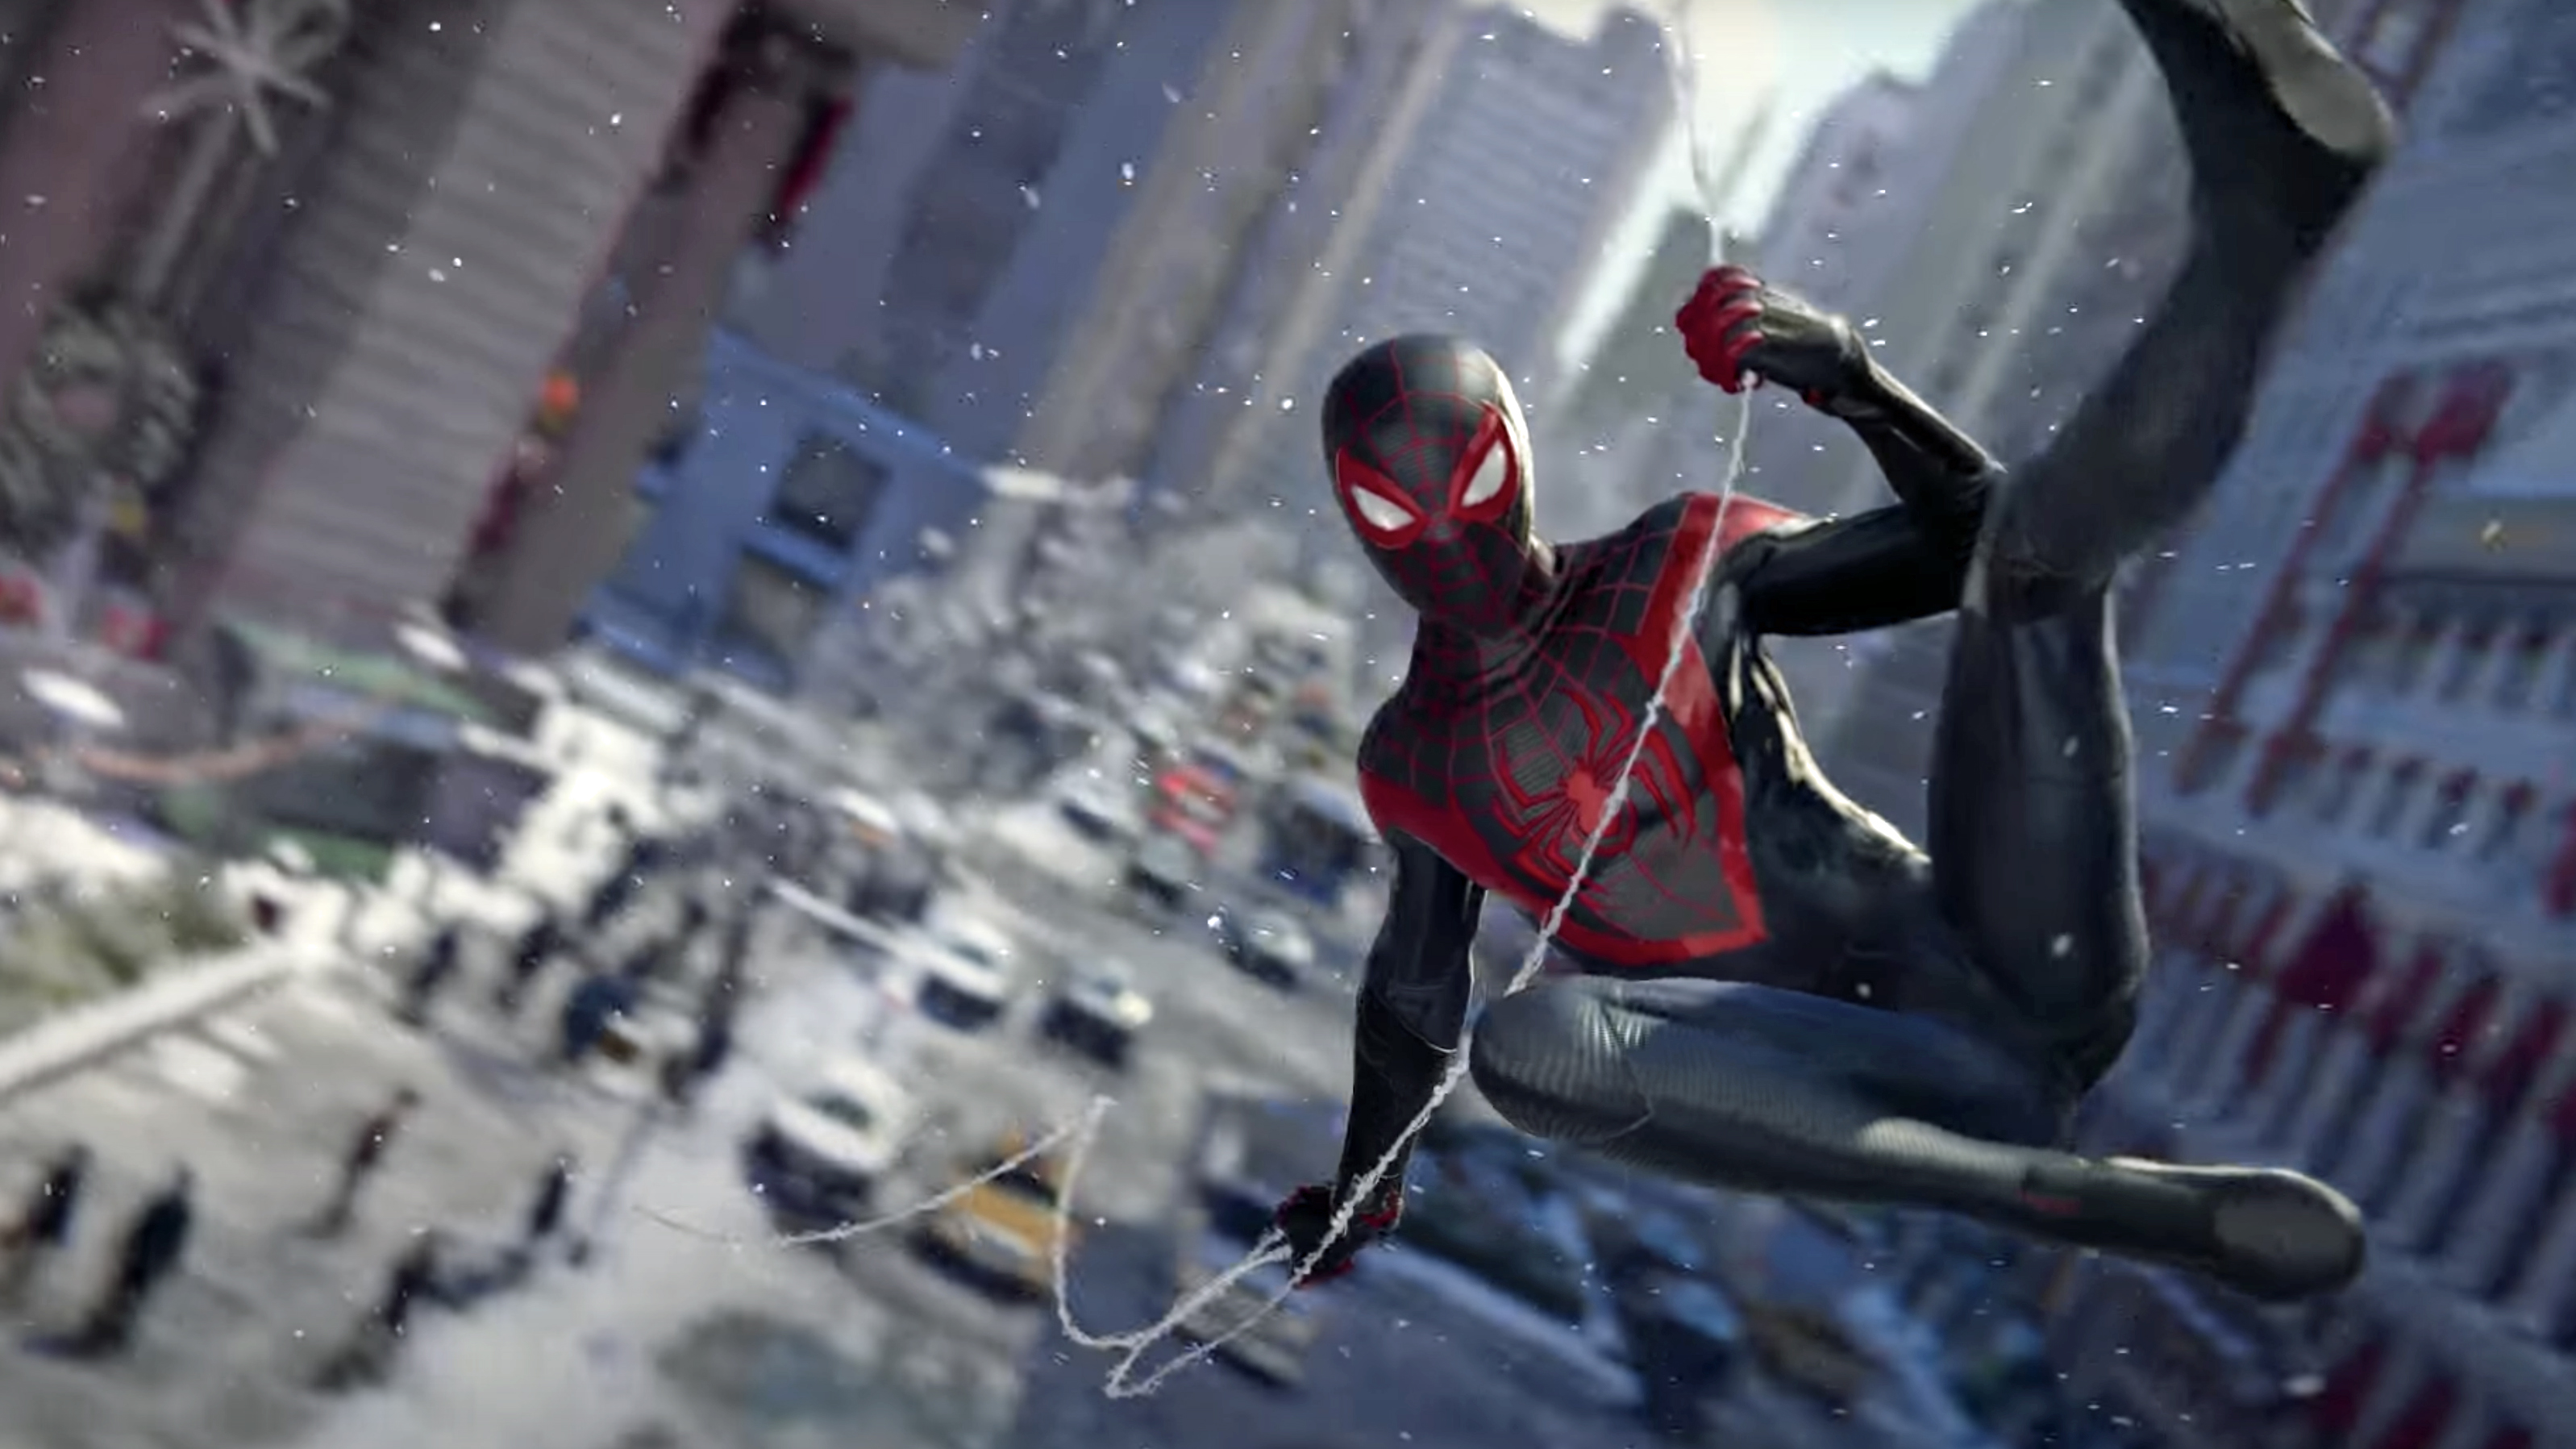 Miles Morales swinging through a snowy New York